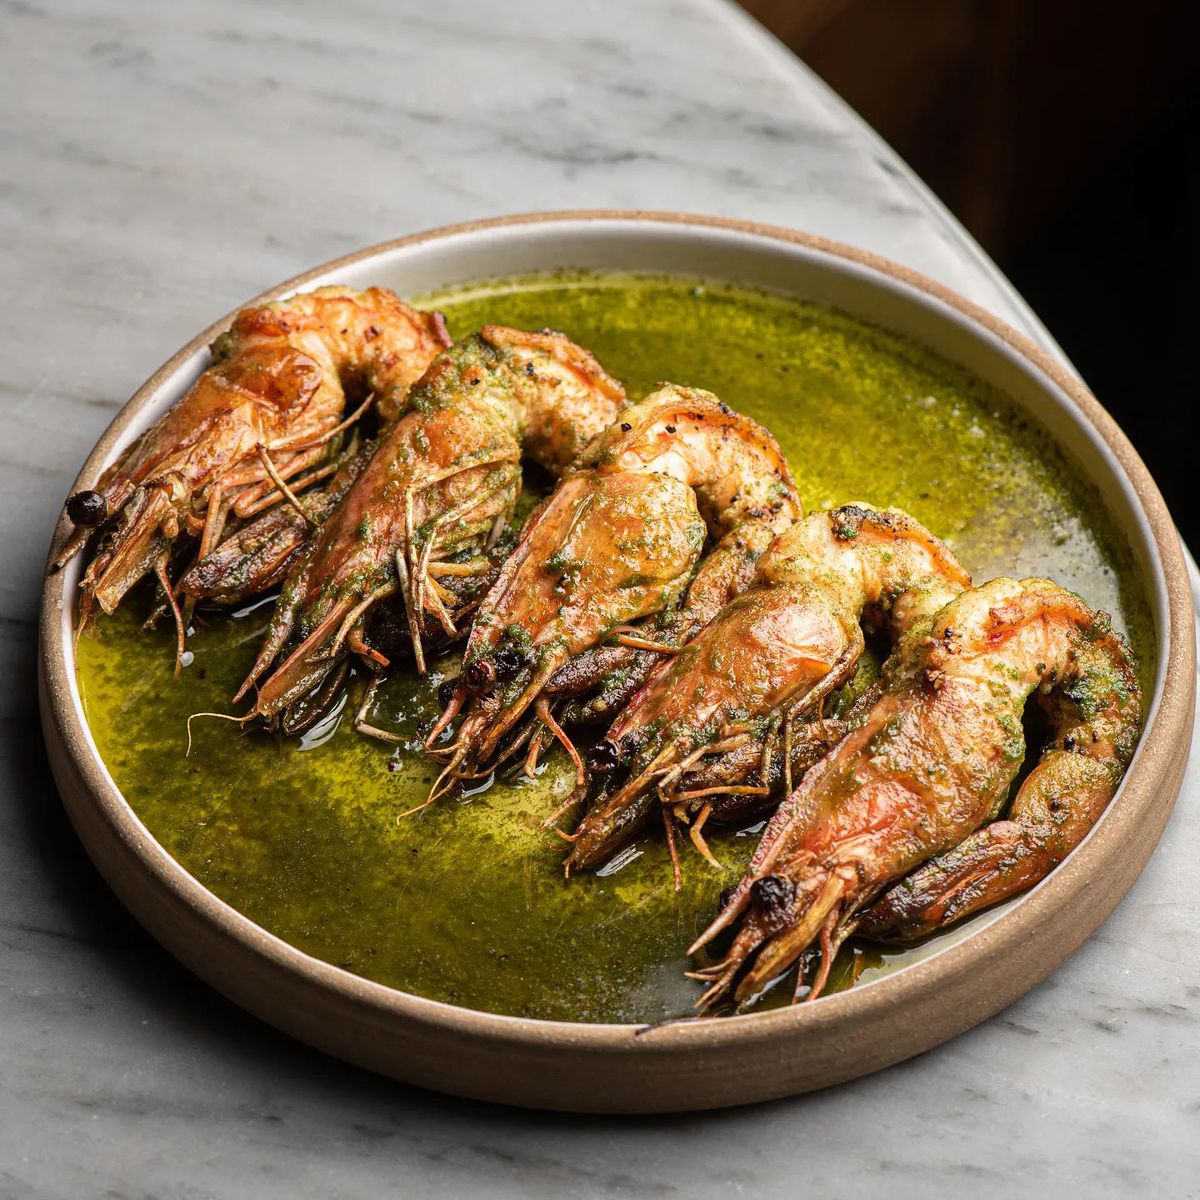 A terracotta-colored stone bowl filled with five grilled prawns and a green sauce made from herbs at Felix Trattoria.